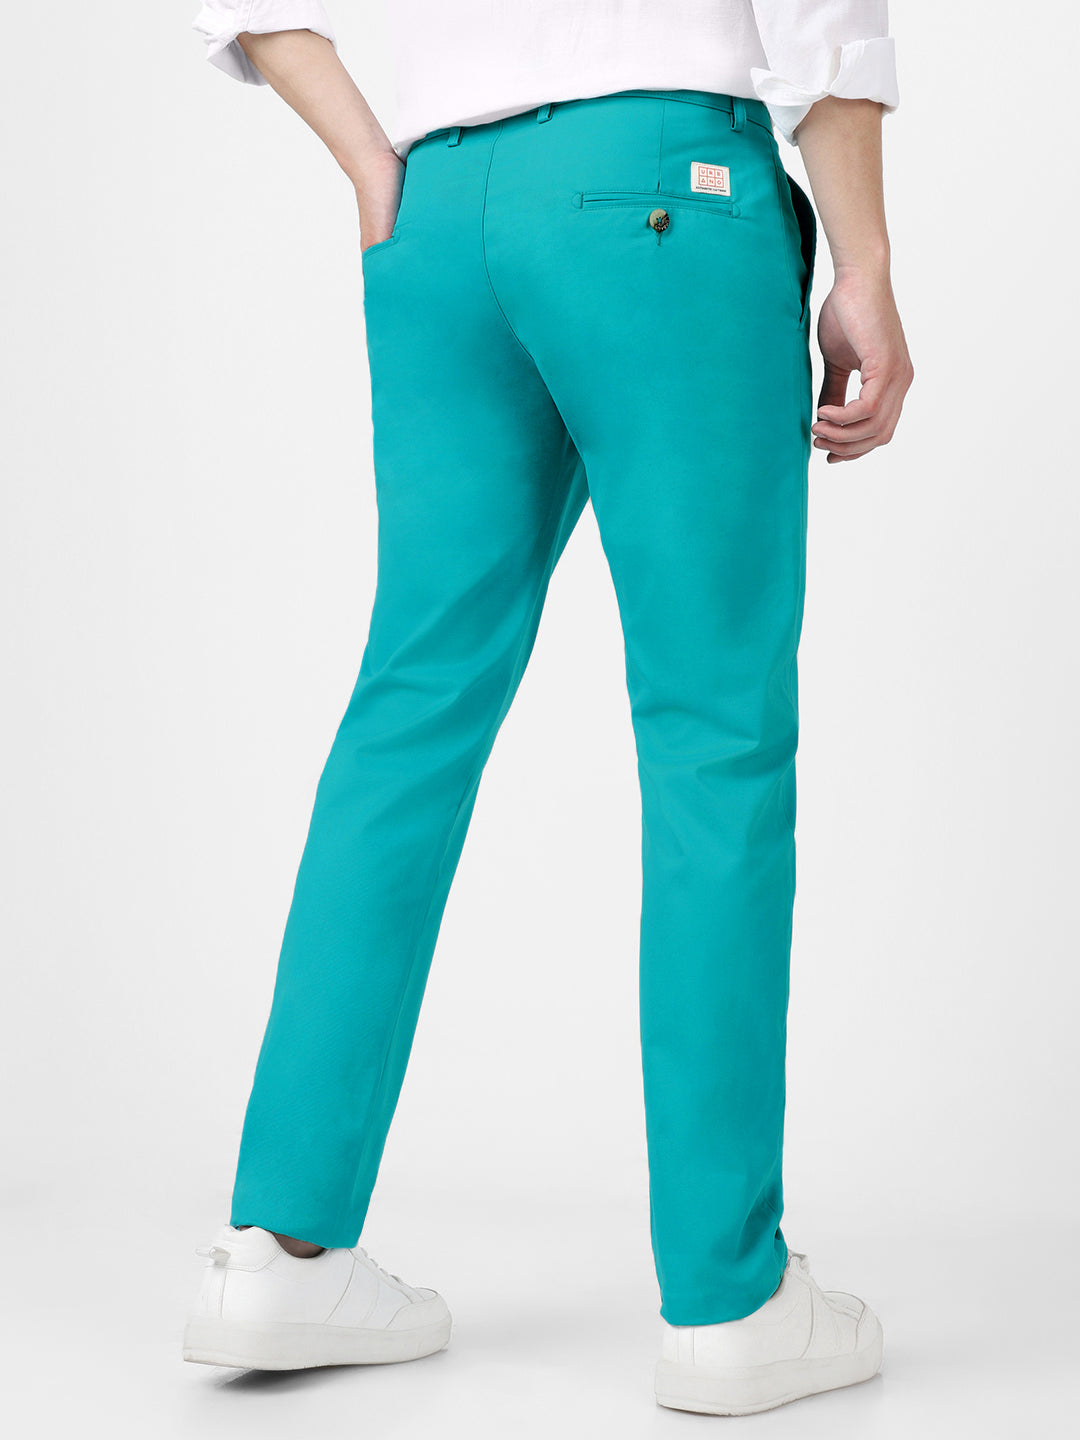 Men's Turquoise Blue Cotton Slim Fit Casual Chinos Trousers Stretch